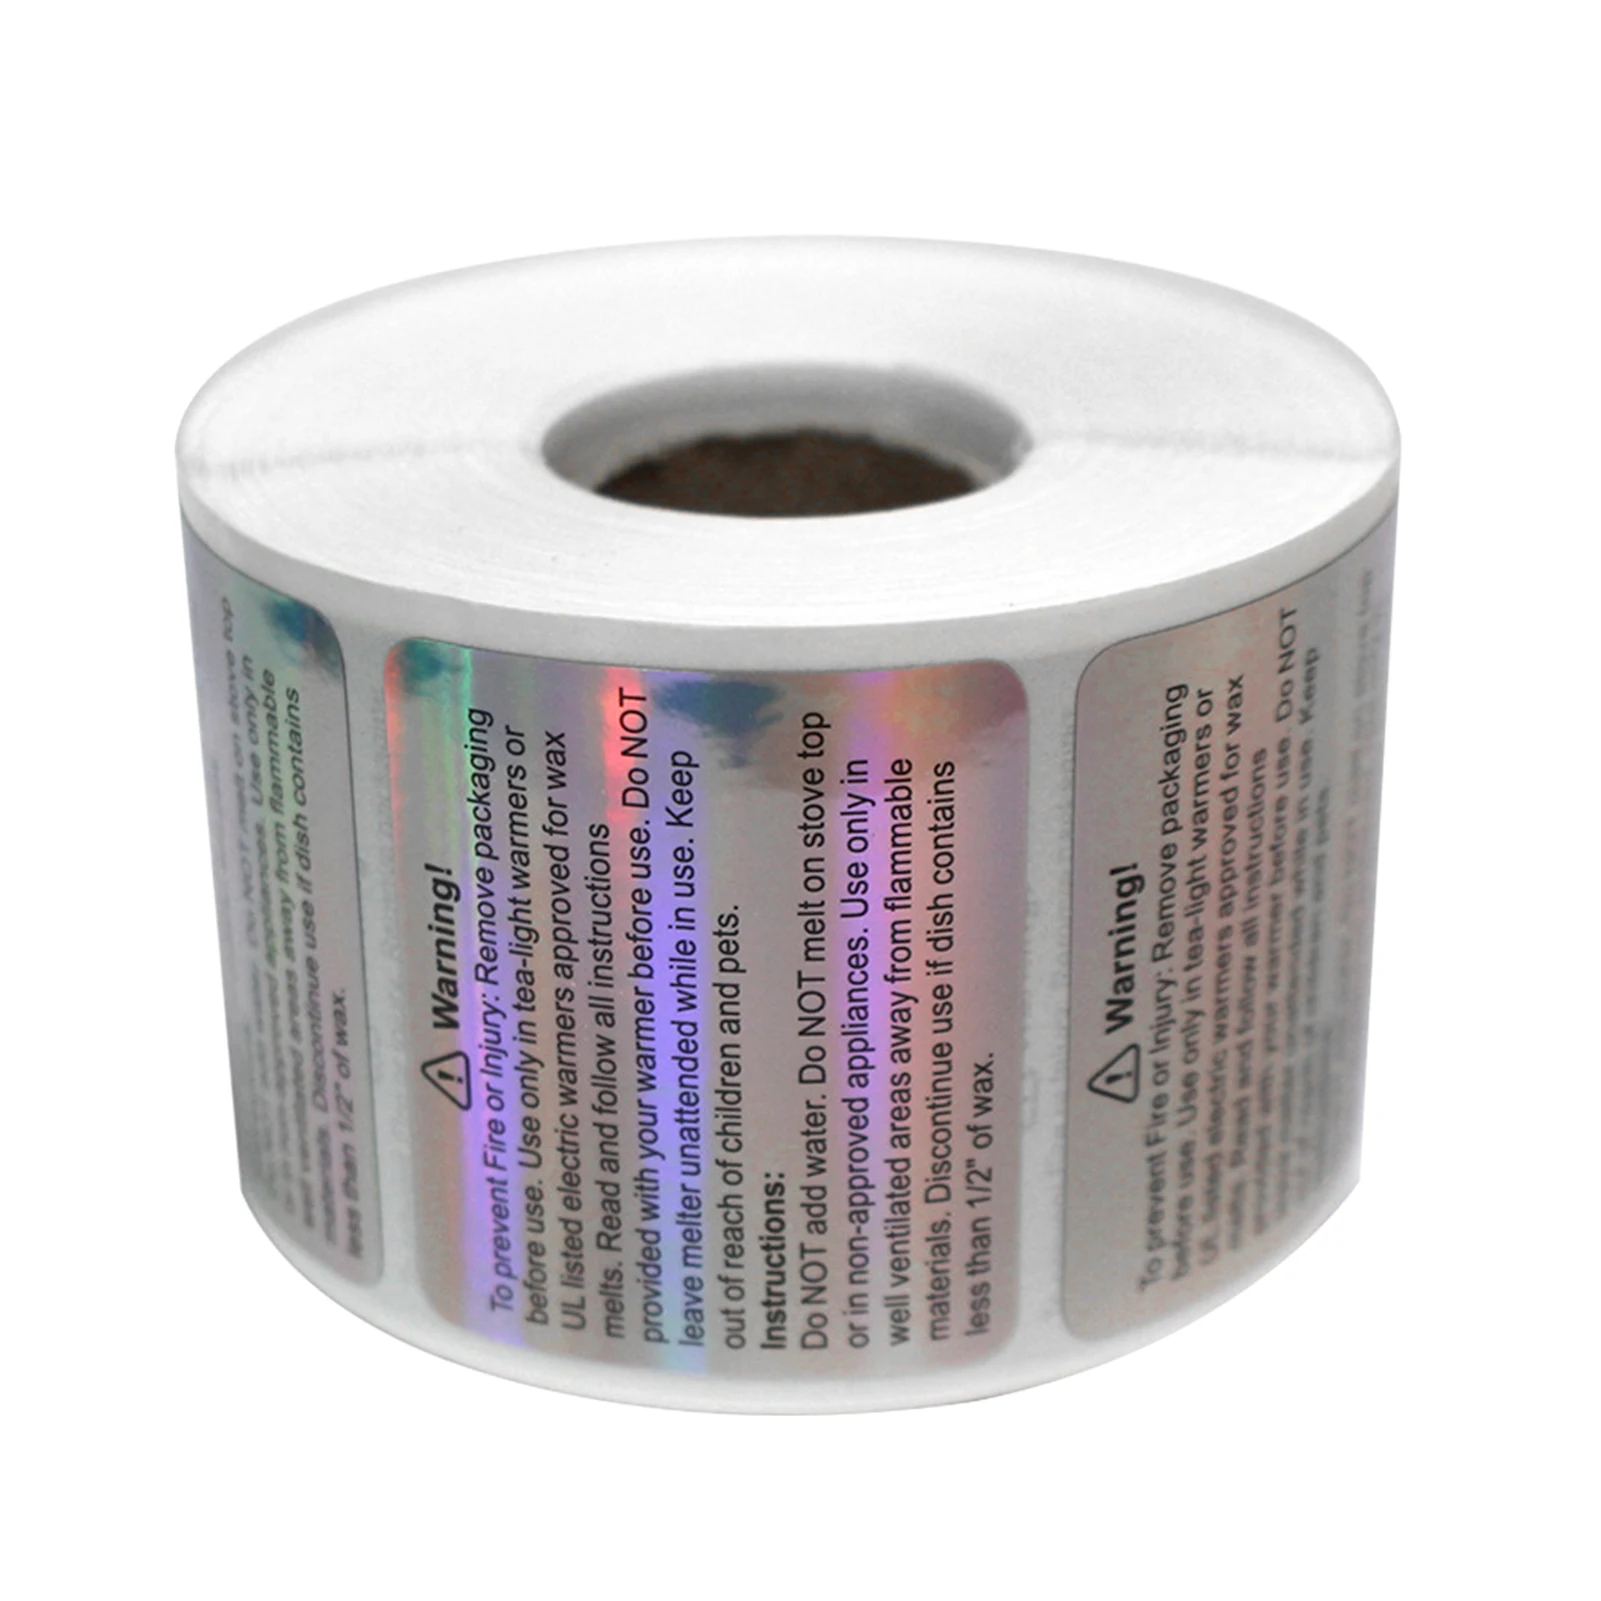 

600pcs/roll 1.8x1.5 Inch Square Container Melting Waterproof Vow Safety Sticker Accessories Text Candle Warning Label Jar